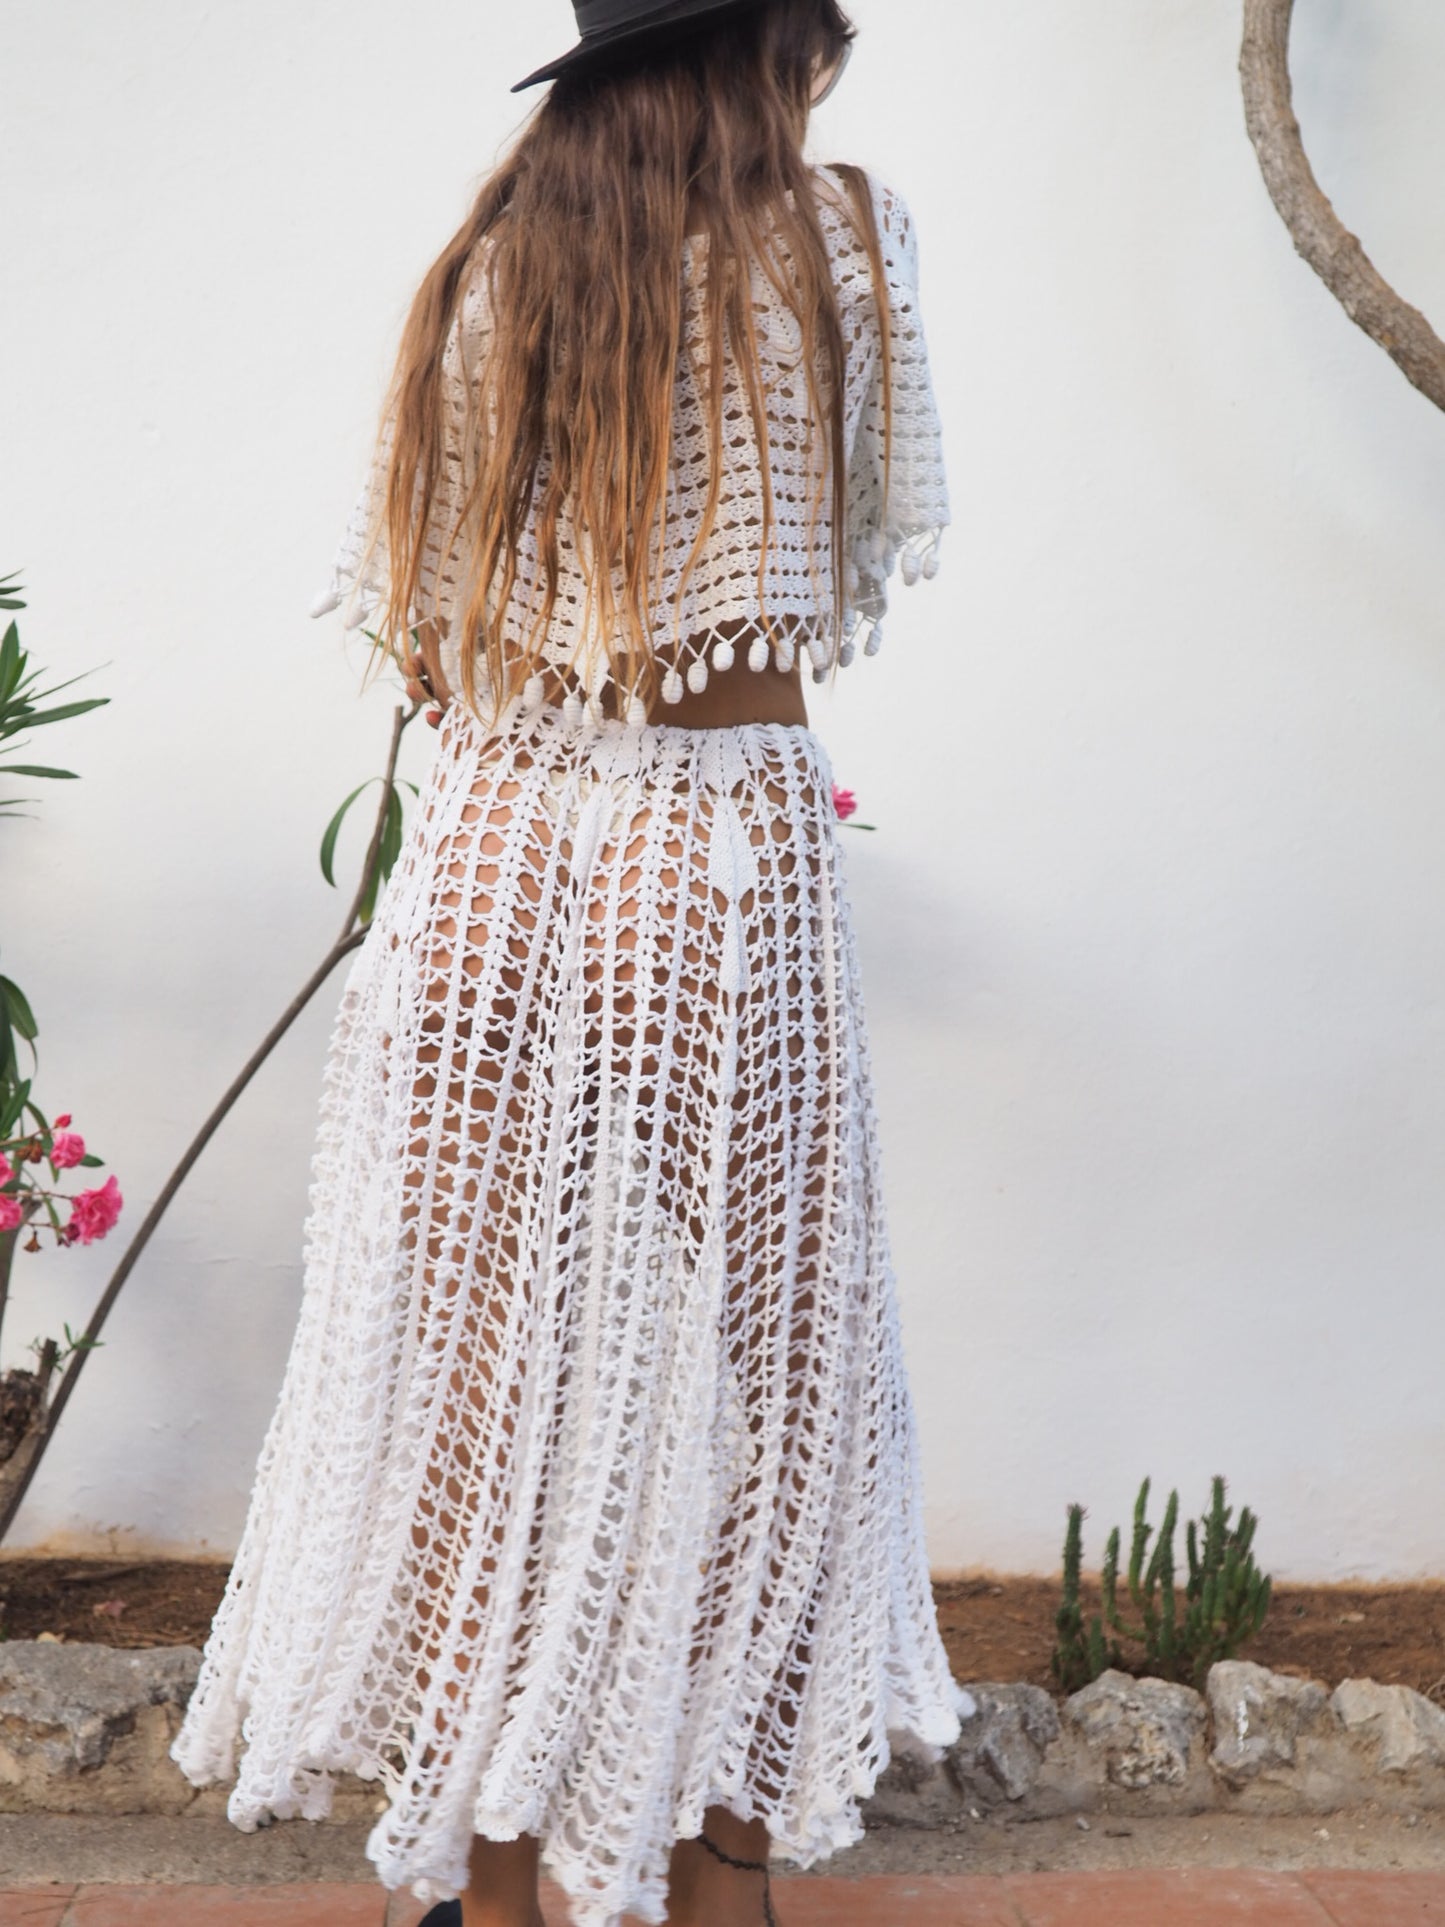 Amazing one off a kind white vintage crochet lace skirt up-cycled by Vagabond Ibiza